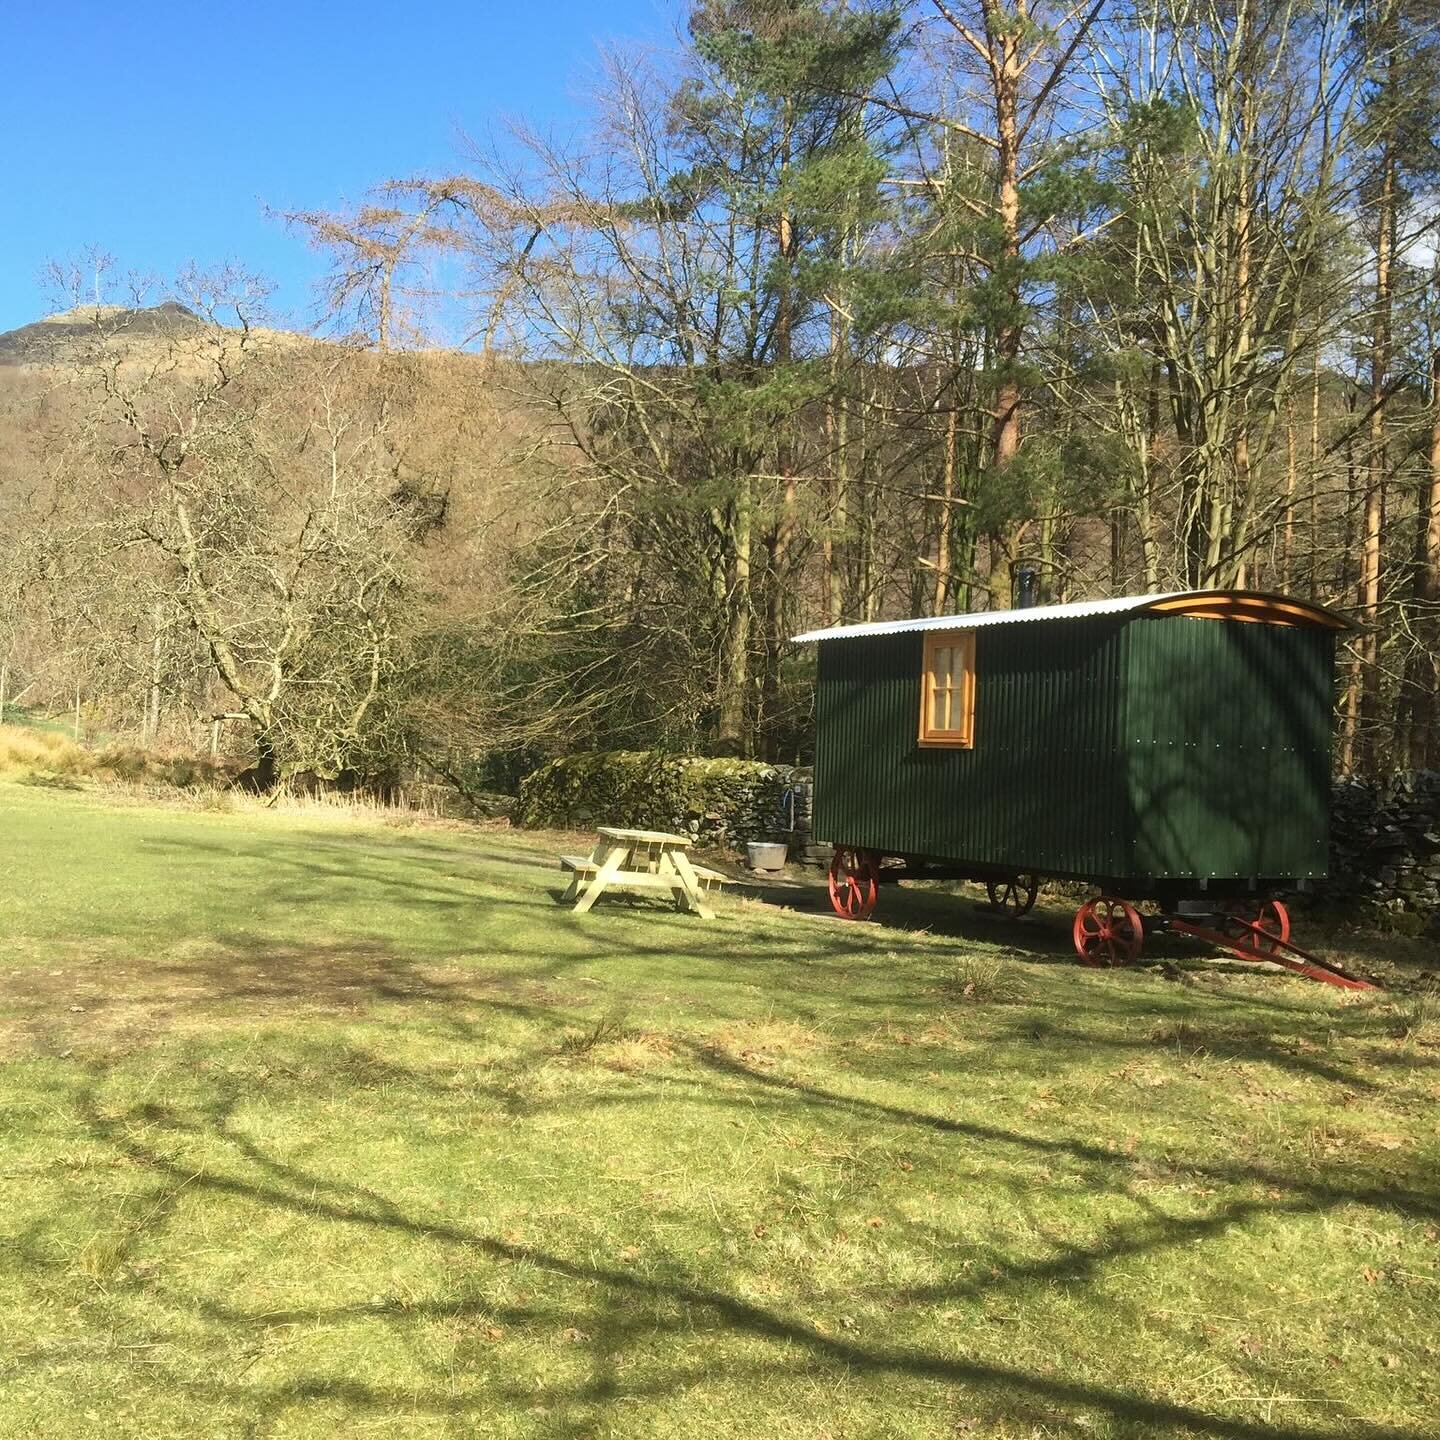 This month, we&rsquo;ve partnered with our friends at @theherdwickhuts in Rydal - if you book one of their spring breaks in March and April you&rsquo;ll receive a complimentary afternoon tea hamper from us that includes our delicious homemade scones,